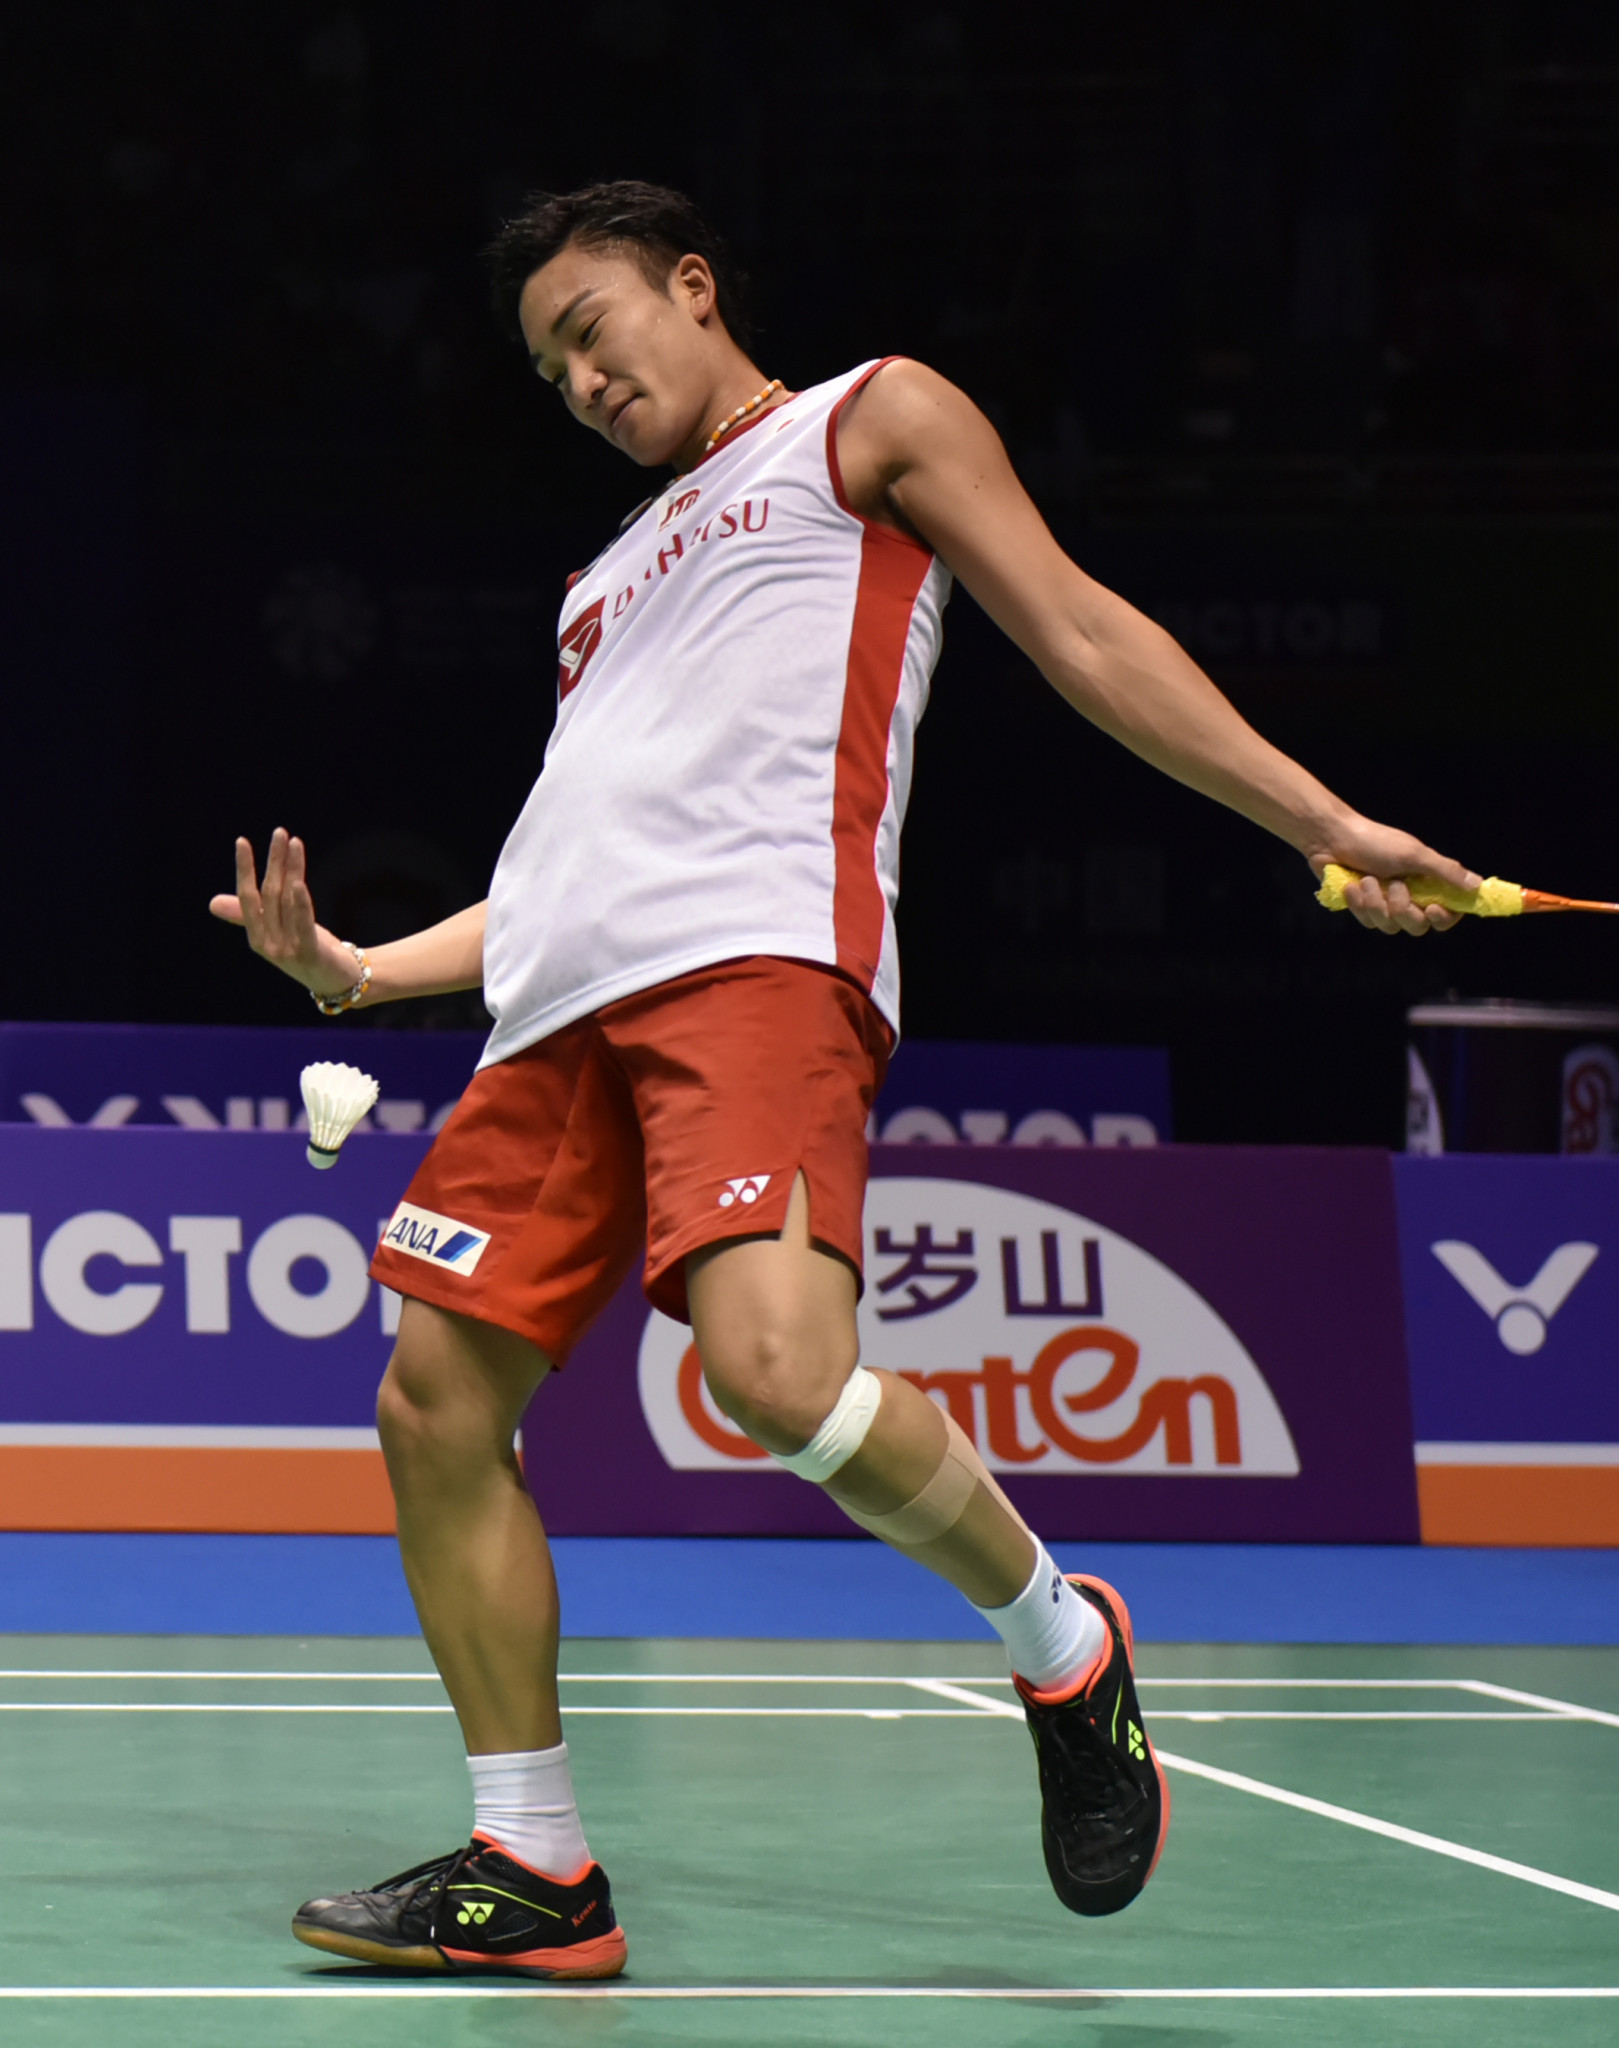 Kento Momota will be out for revenge following his shock defeat to the Indonesian player in the final of the China Open ©Getty Images